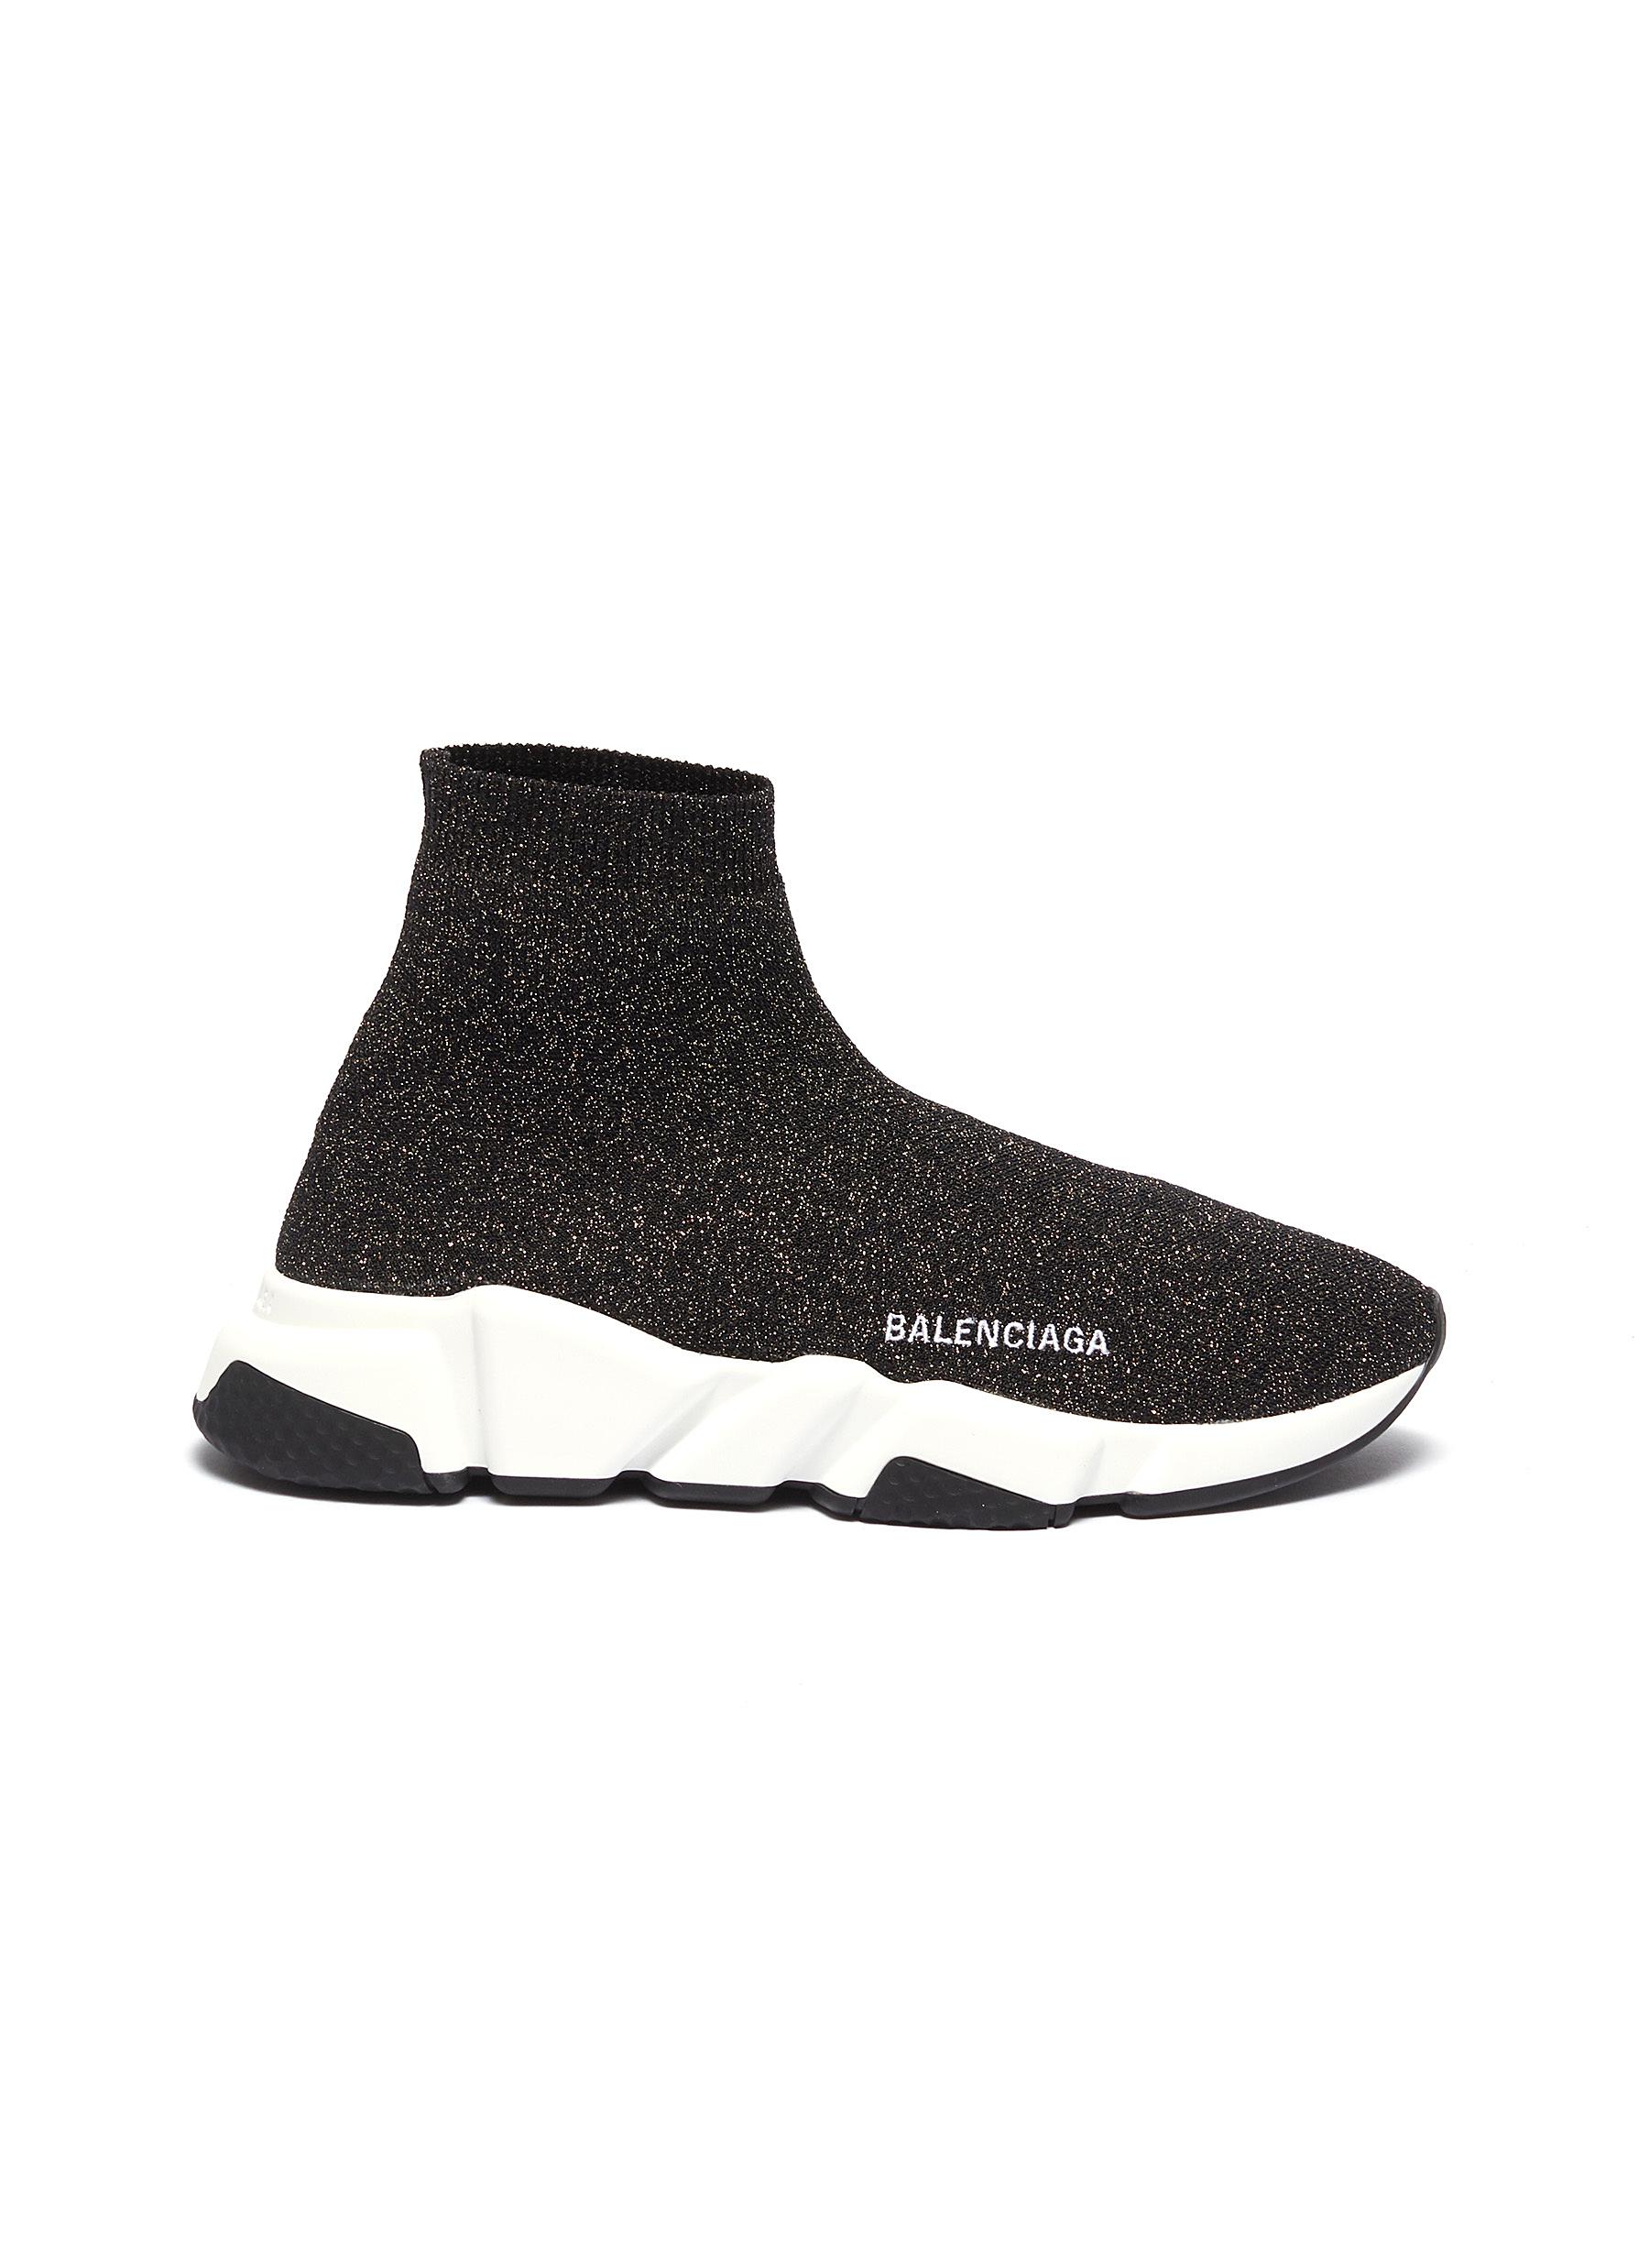 Photo of Balenciaga Shoes Sneakers online sale